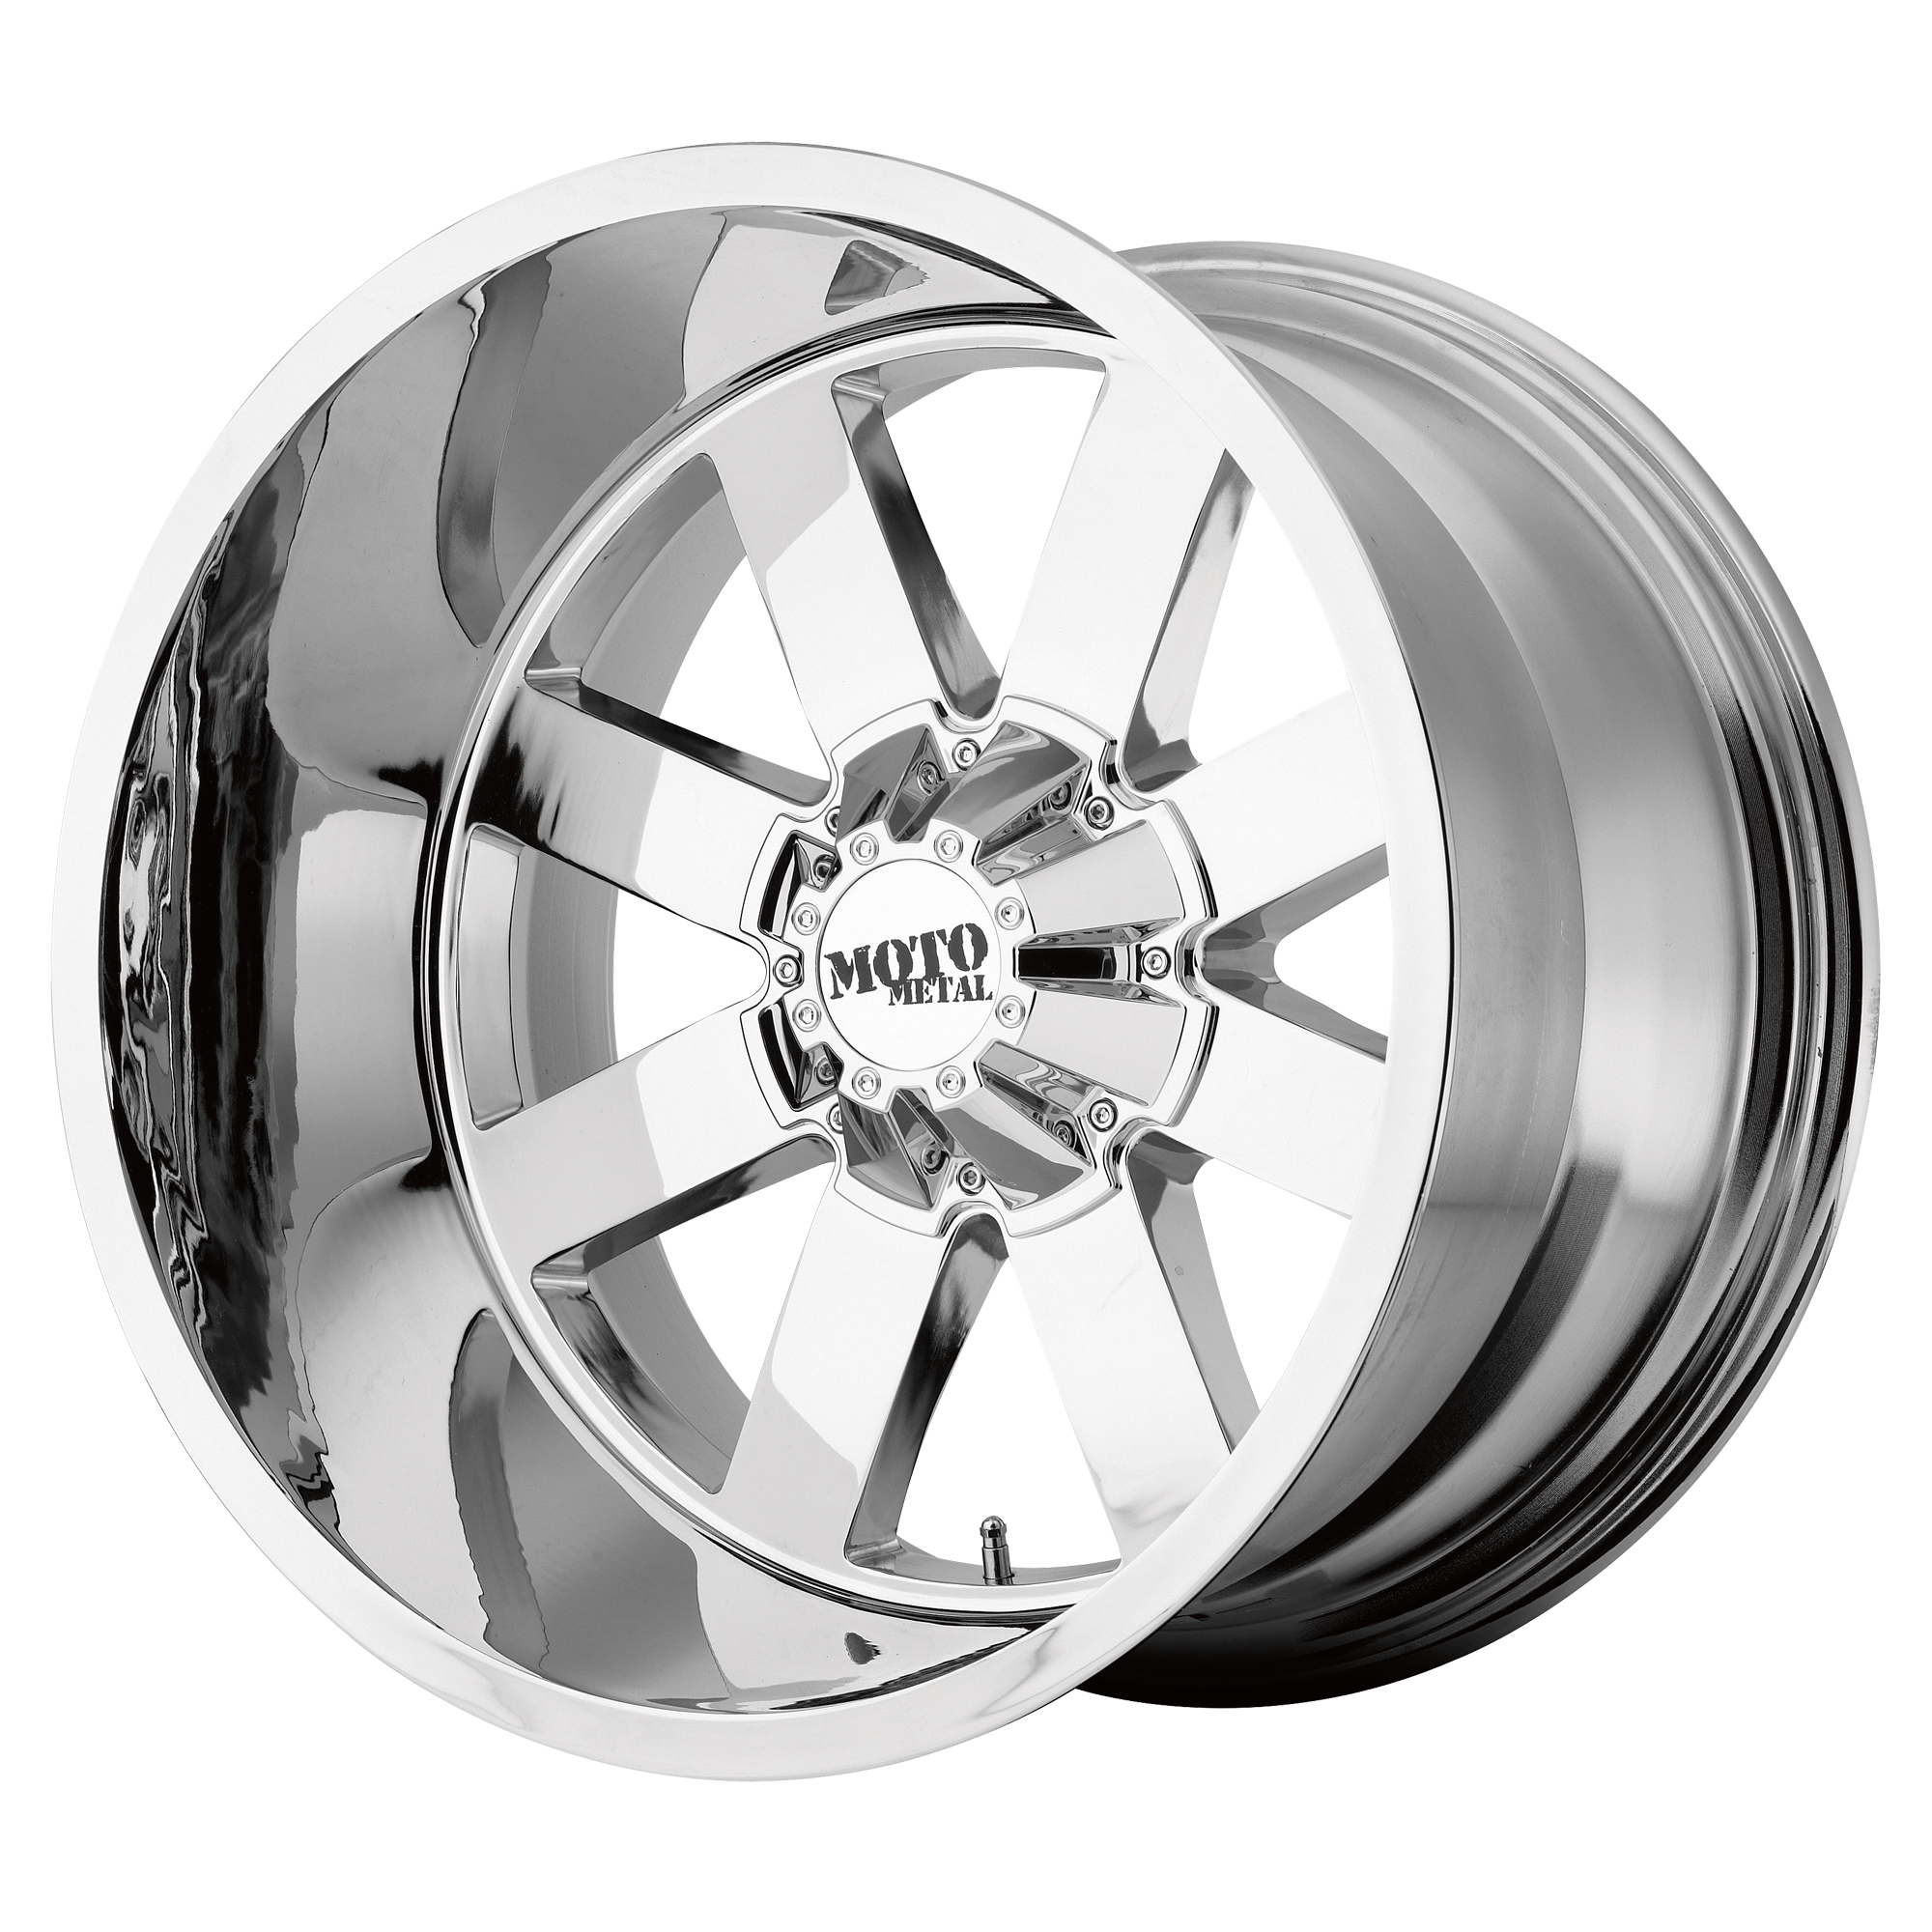 MO962 20x12 6x135.00 CHROME (-44 mm) - Tires and Engine Performance